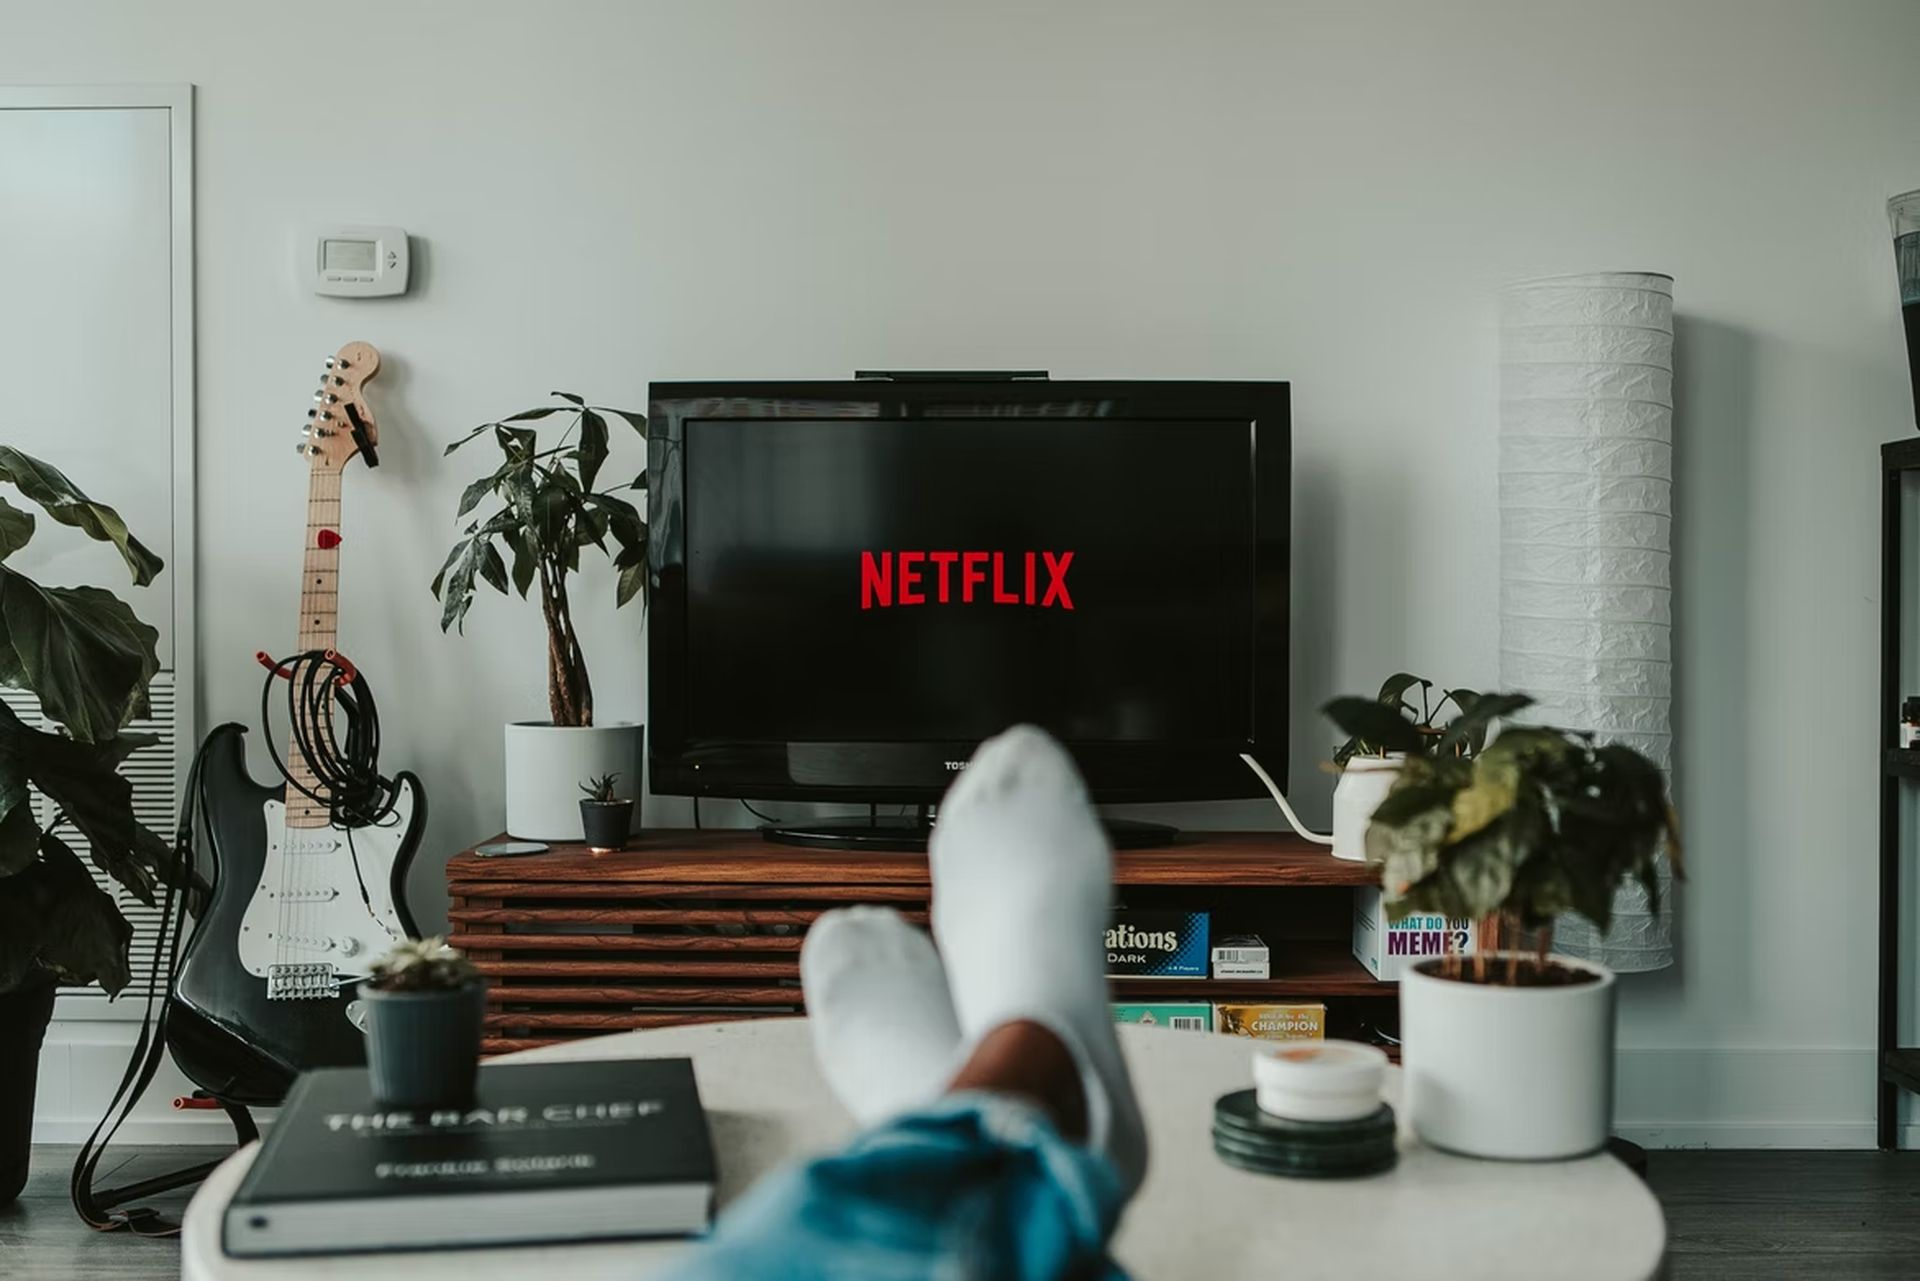 Today we are here to show you how to fix Netflix error code NW-2-5. What is it, and what causes this issue?